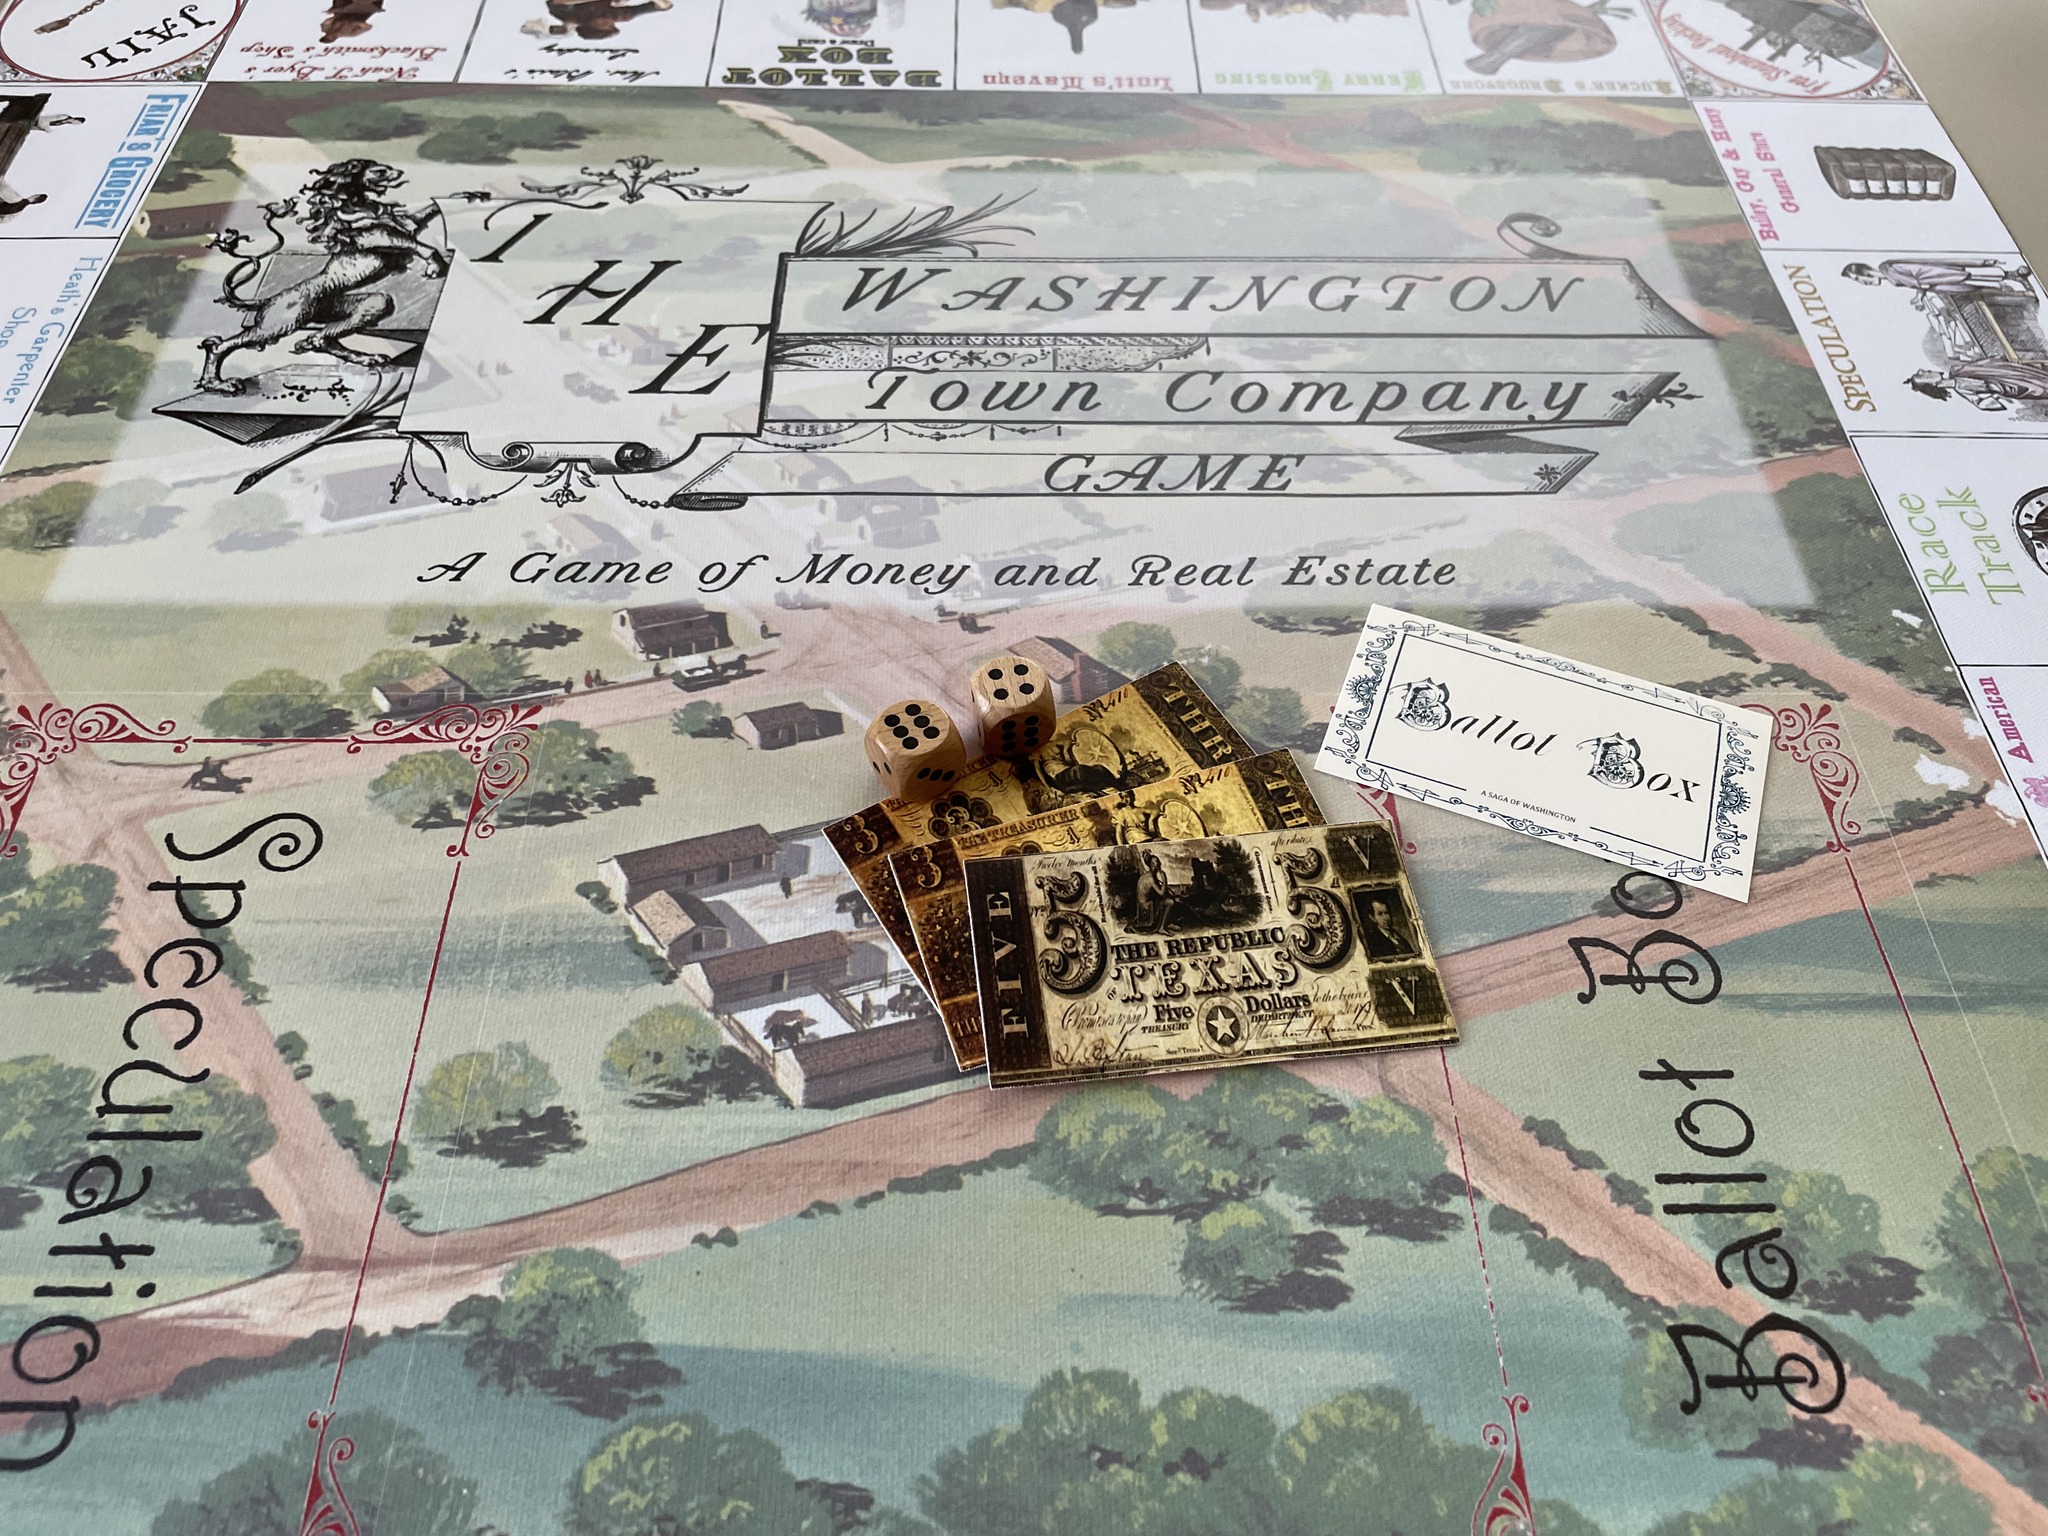 Town Company: A Game of Money and Real Estate